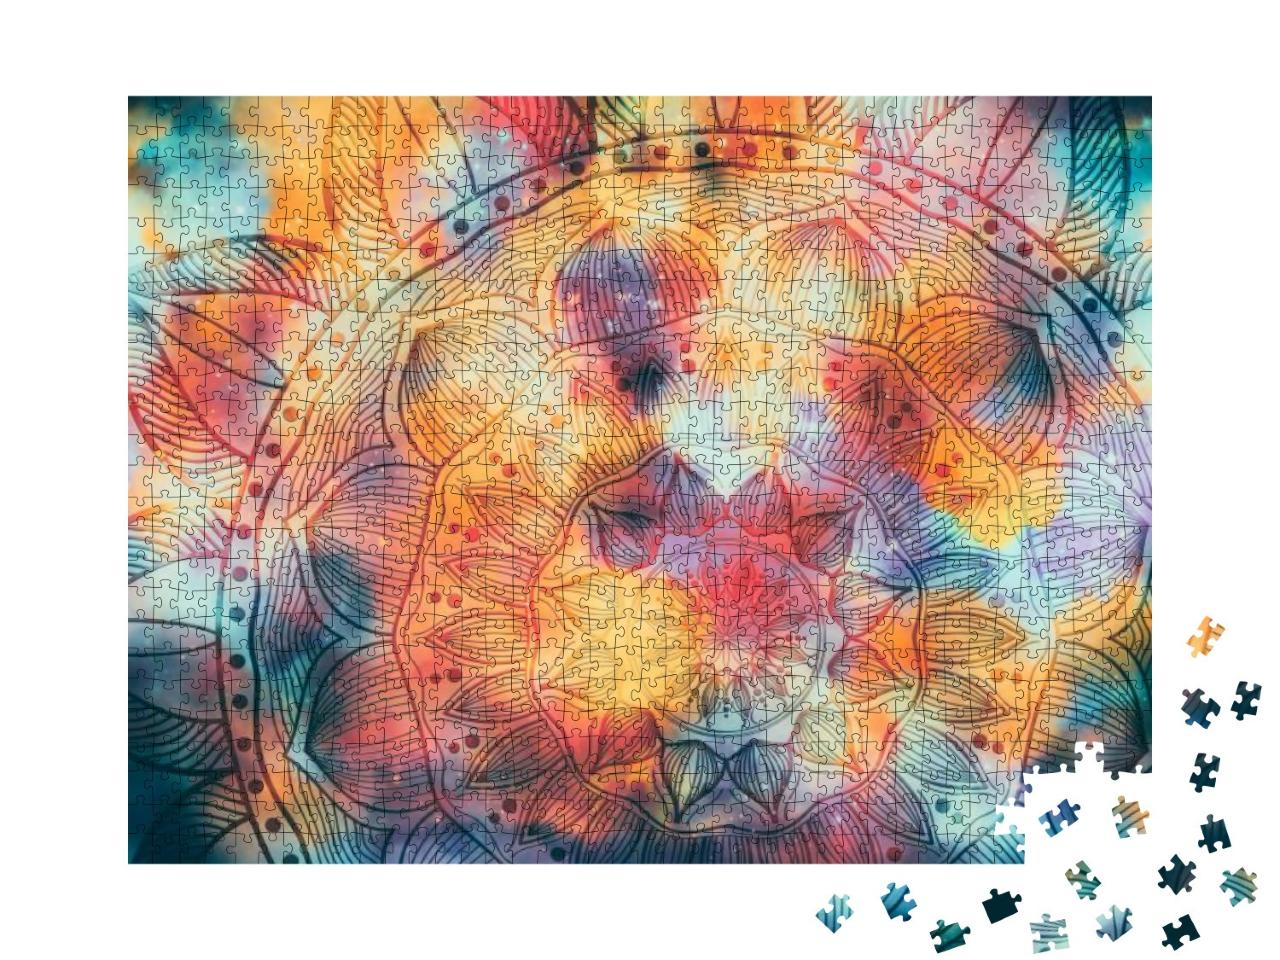 Abstract Mandala Graphic Design & Watercolor Digital Art... Jigsaw Puzzle with 1000 pieces